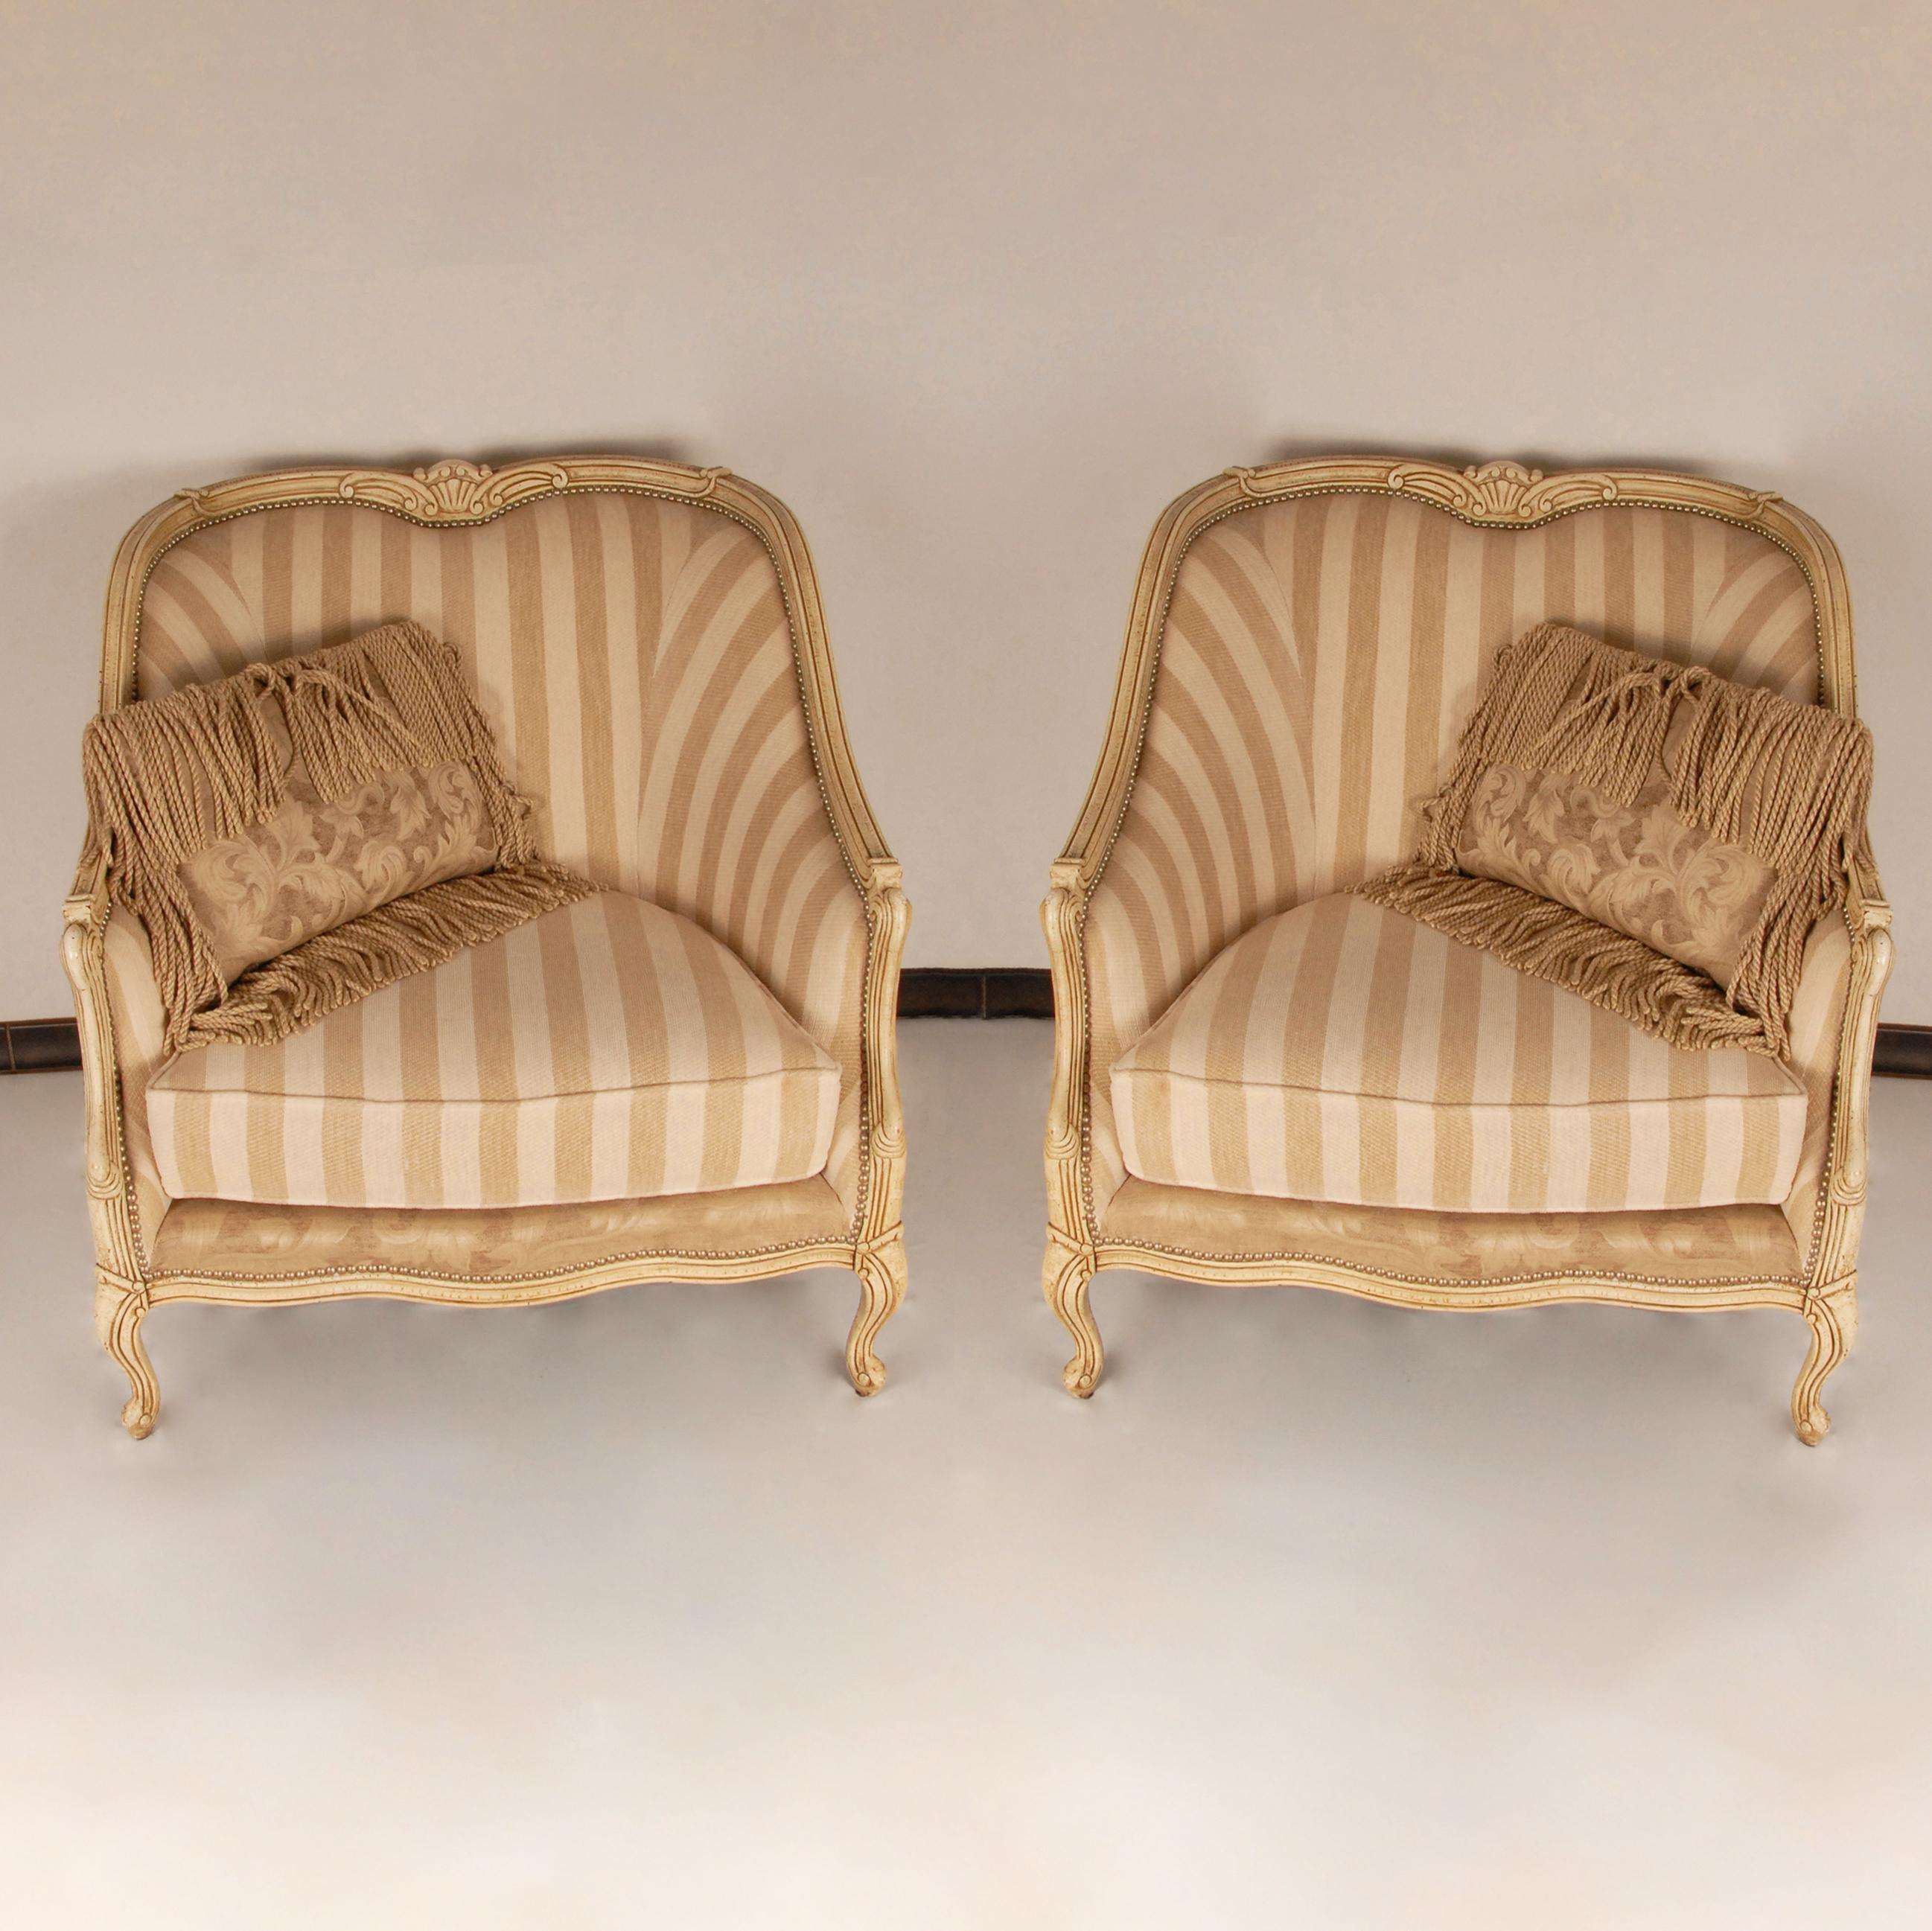 Henredon Beacon Hill oversized upholstered Bergère arm chairs.
A pair French country painted Bergère armchairs.
Materials: Fruitwood, Fabric
Design: By Henredon
Style: French Country, French Provincial, Baroque, Rococo, Antique 
Origin: United